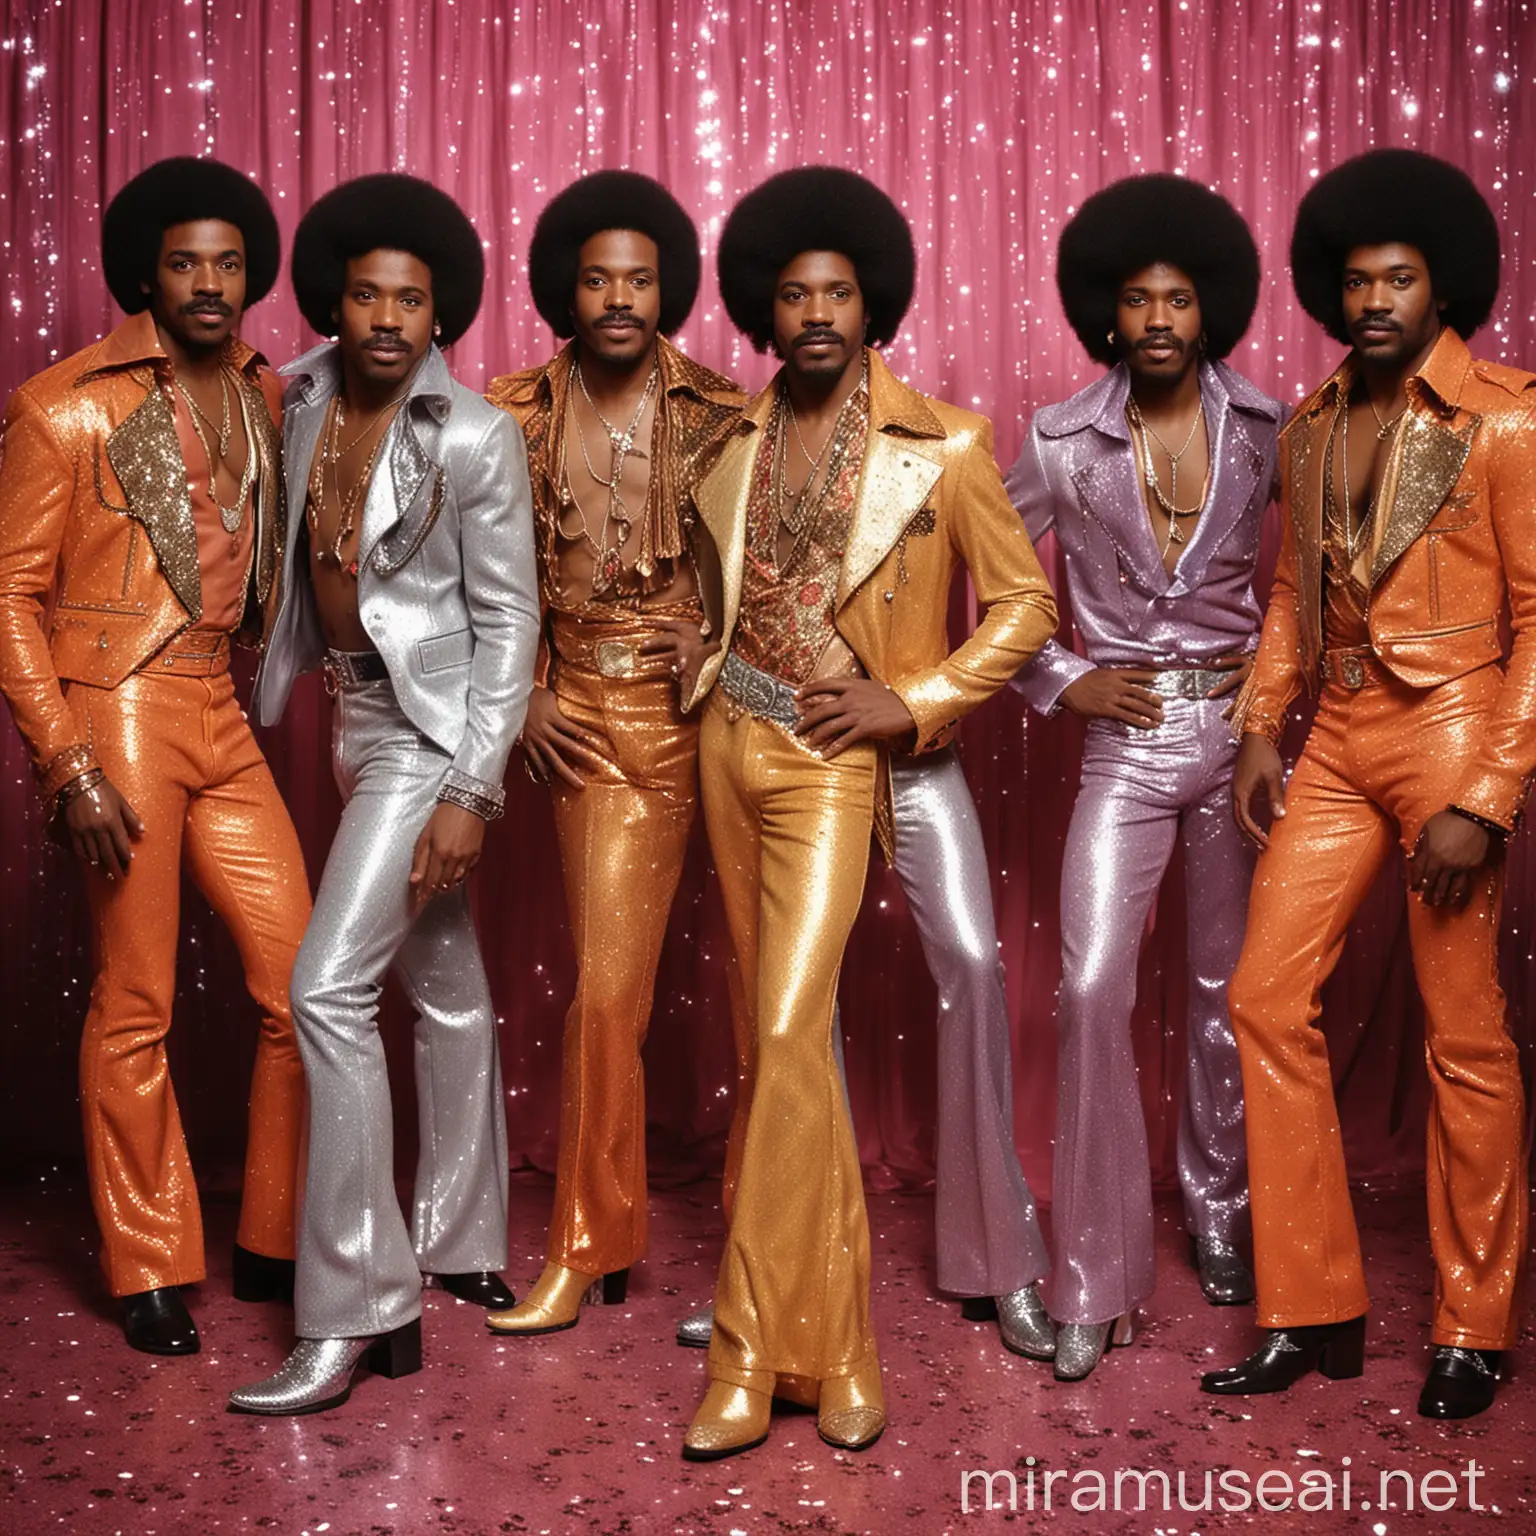 African American male 70's Disco Band, with glitter boots and wild outfits, all different outfits, fun backdrop